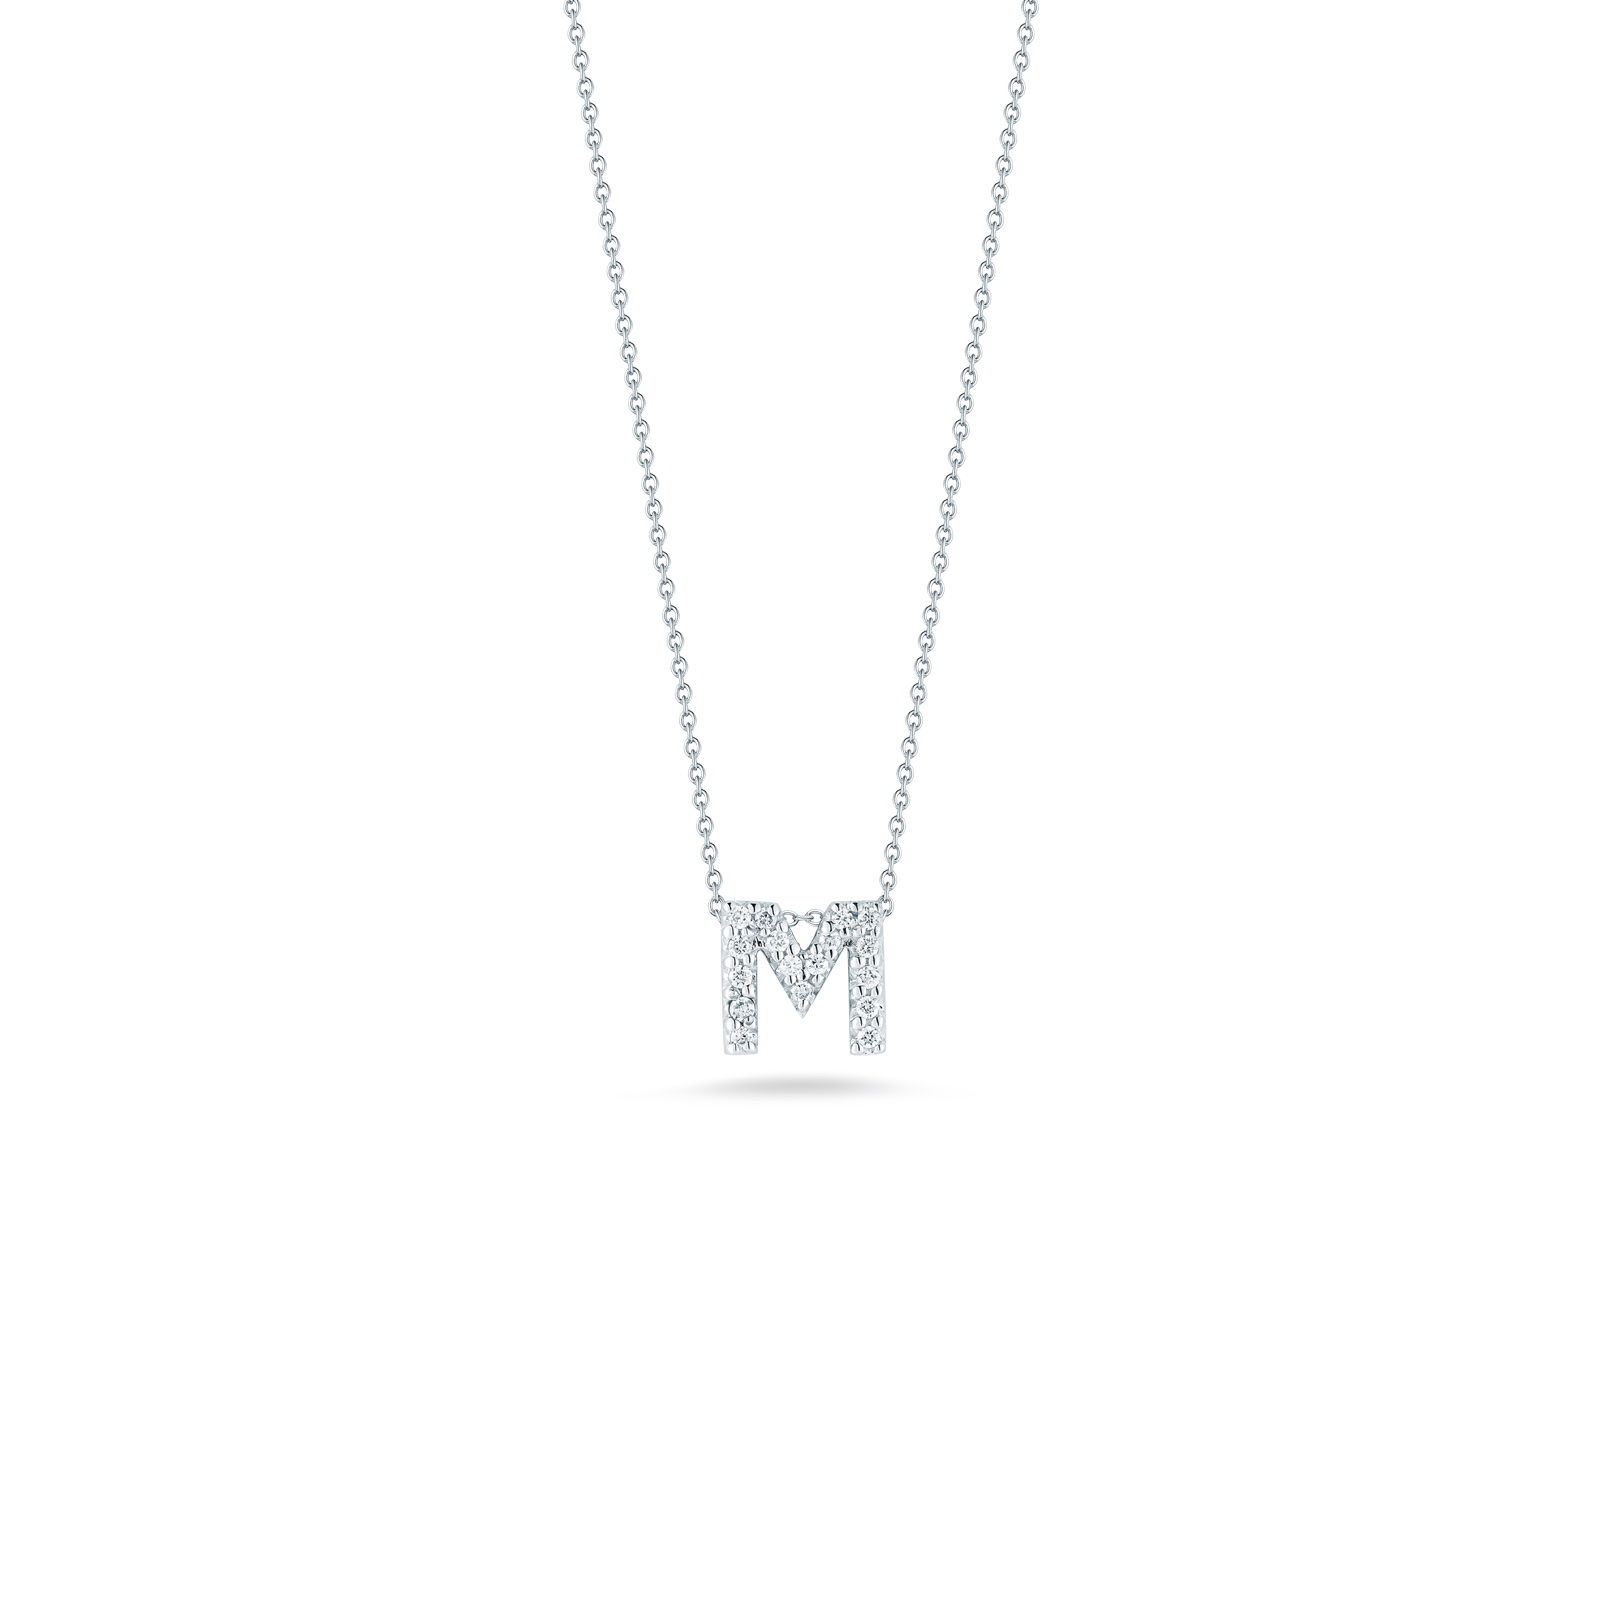 Tiny Treasures Love Letter “m” Necklace